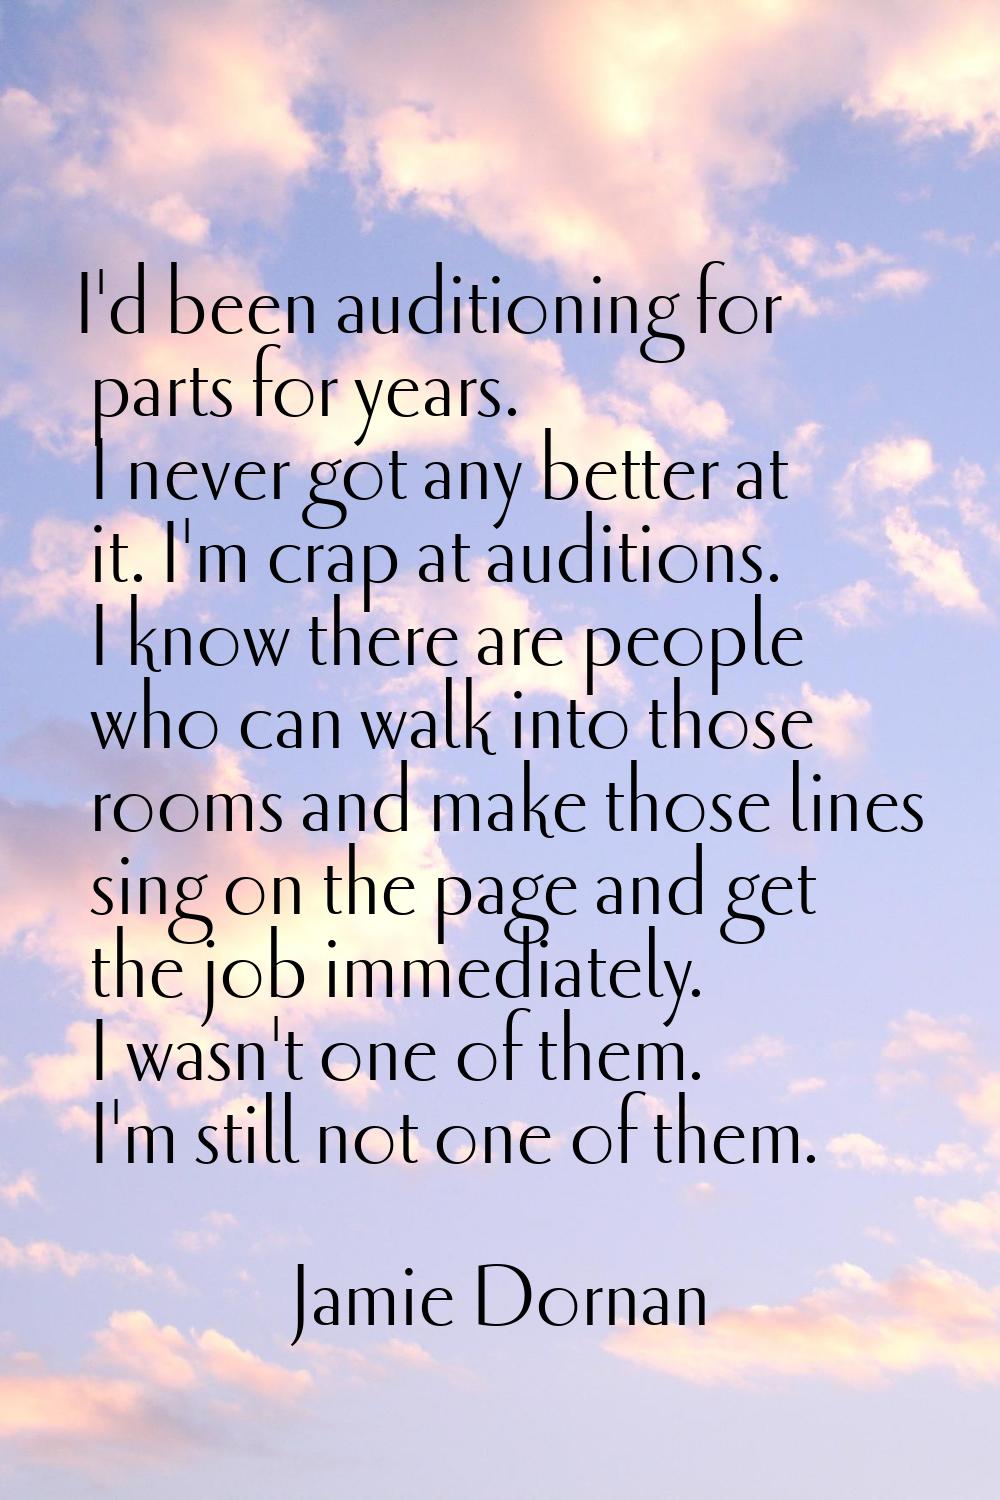 I'd been auditioning for parts for years. I never got any better at it. I'm crap at auditions. I kn